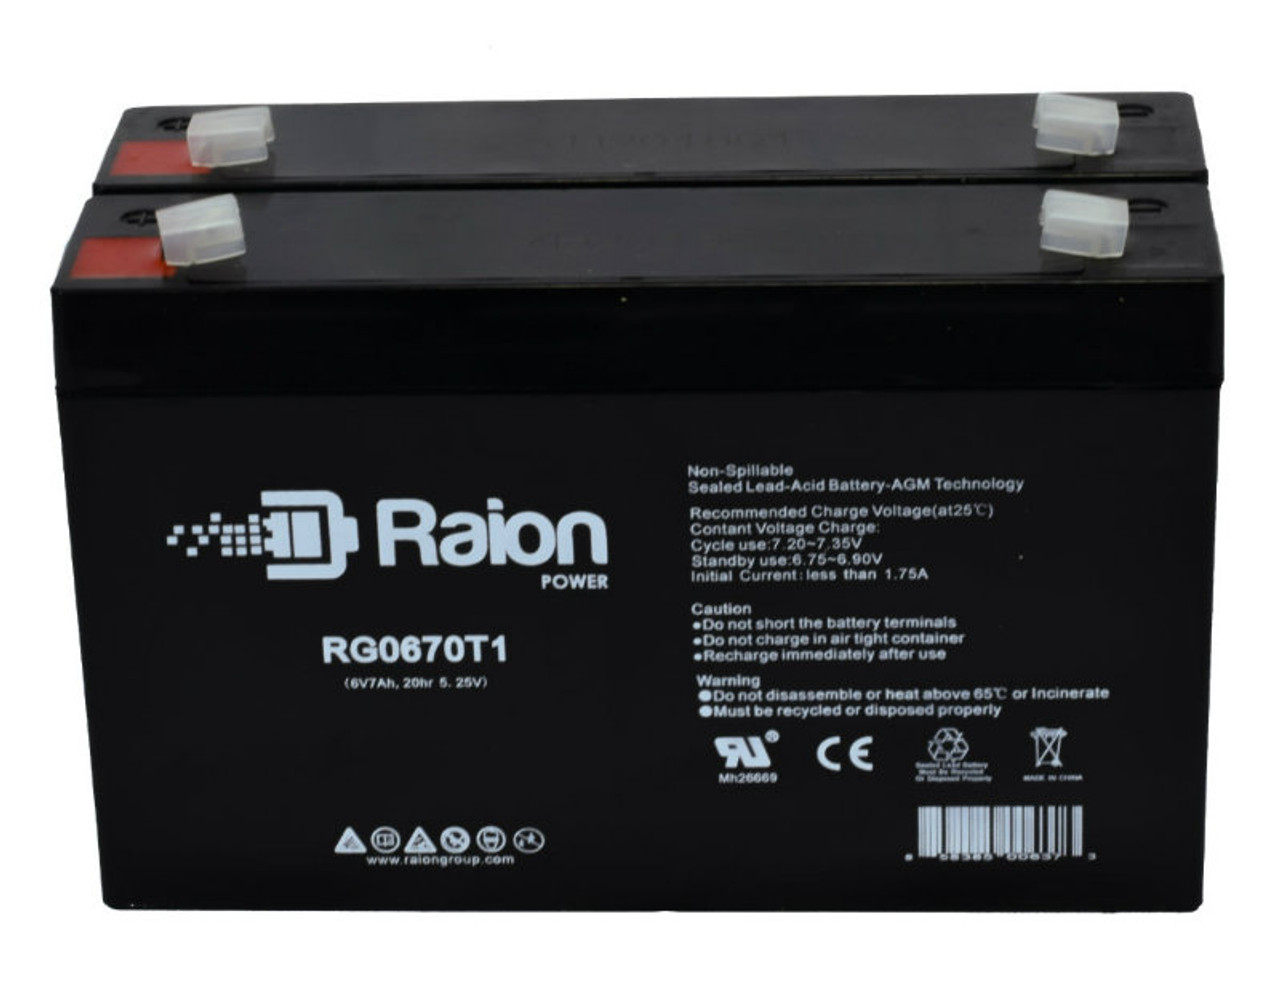 Raion Power RG0670T1 6V 7Ah Replacement Emergency Light Battery for McPhilben / Daybright DBL6V8A1 - 2 Pack